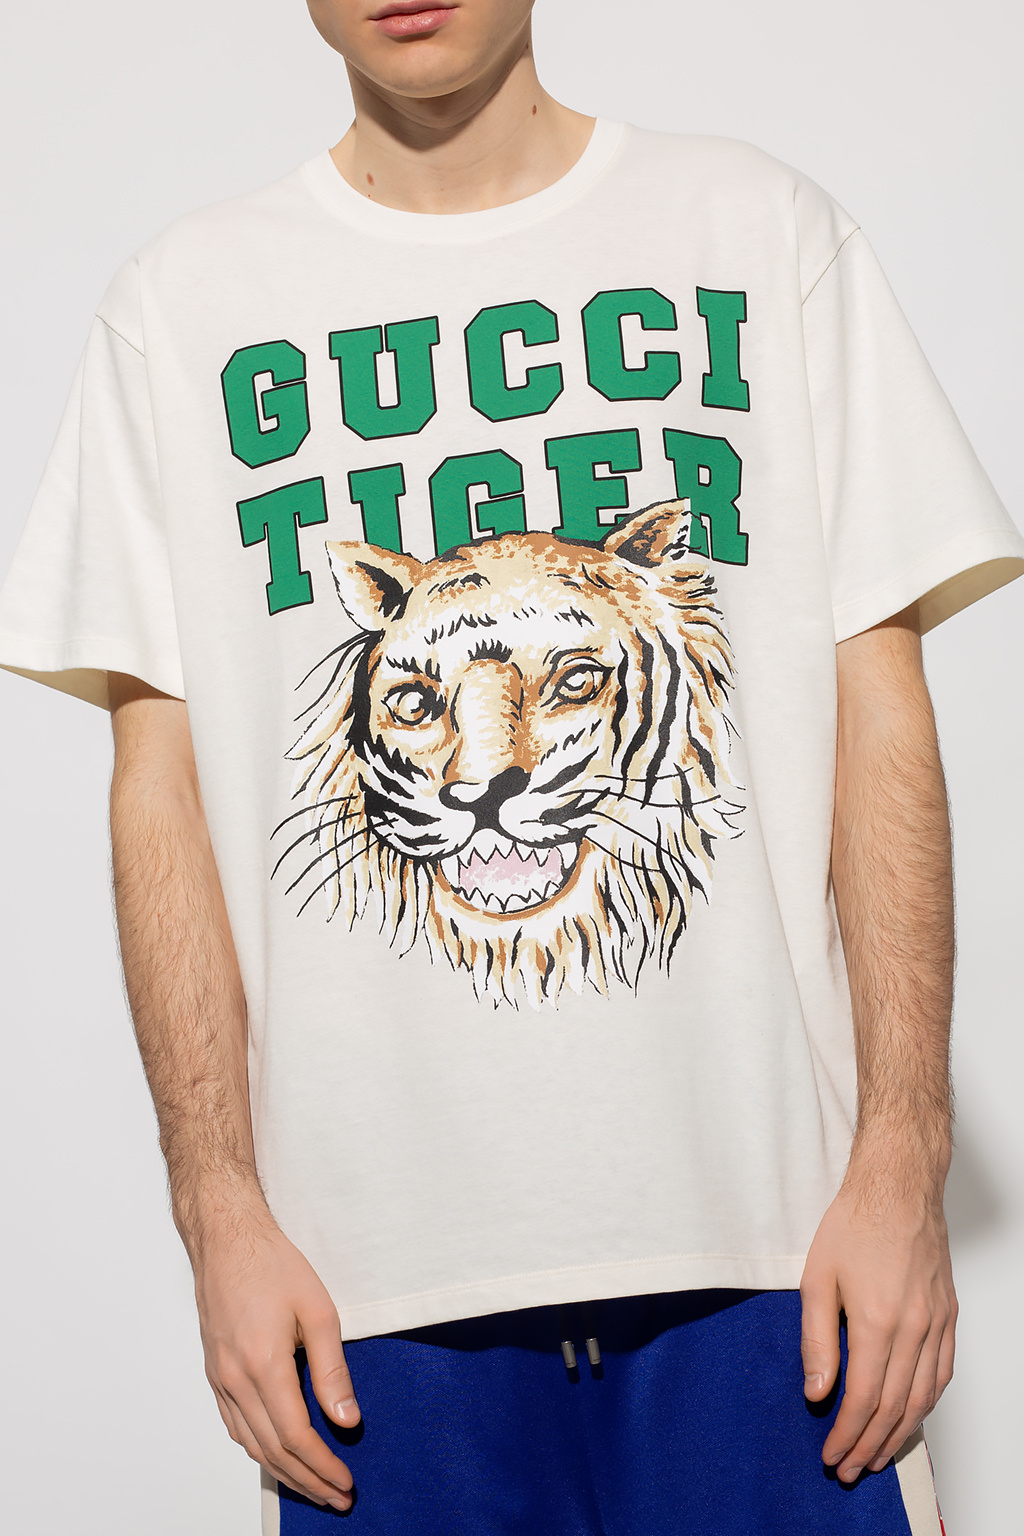 Gucci Printed T-shirt from the 'Gucci Tiger' collection | Men's Clothing |  Vitkac